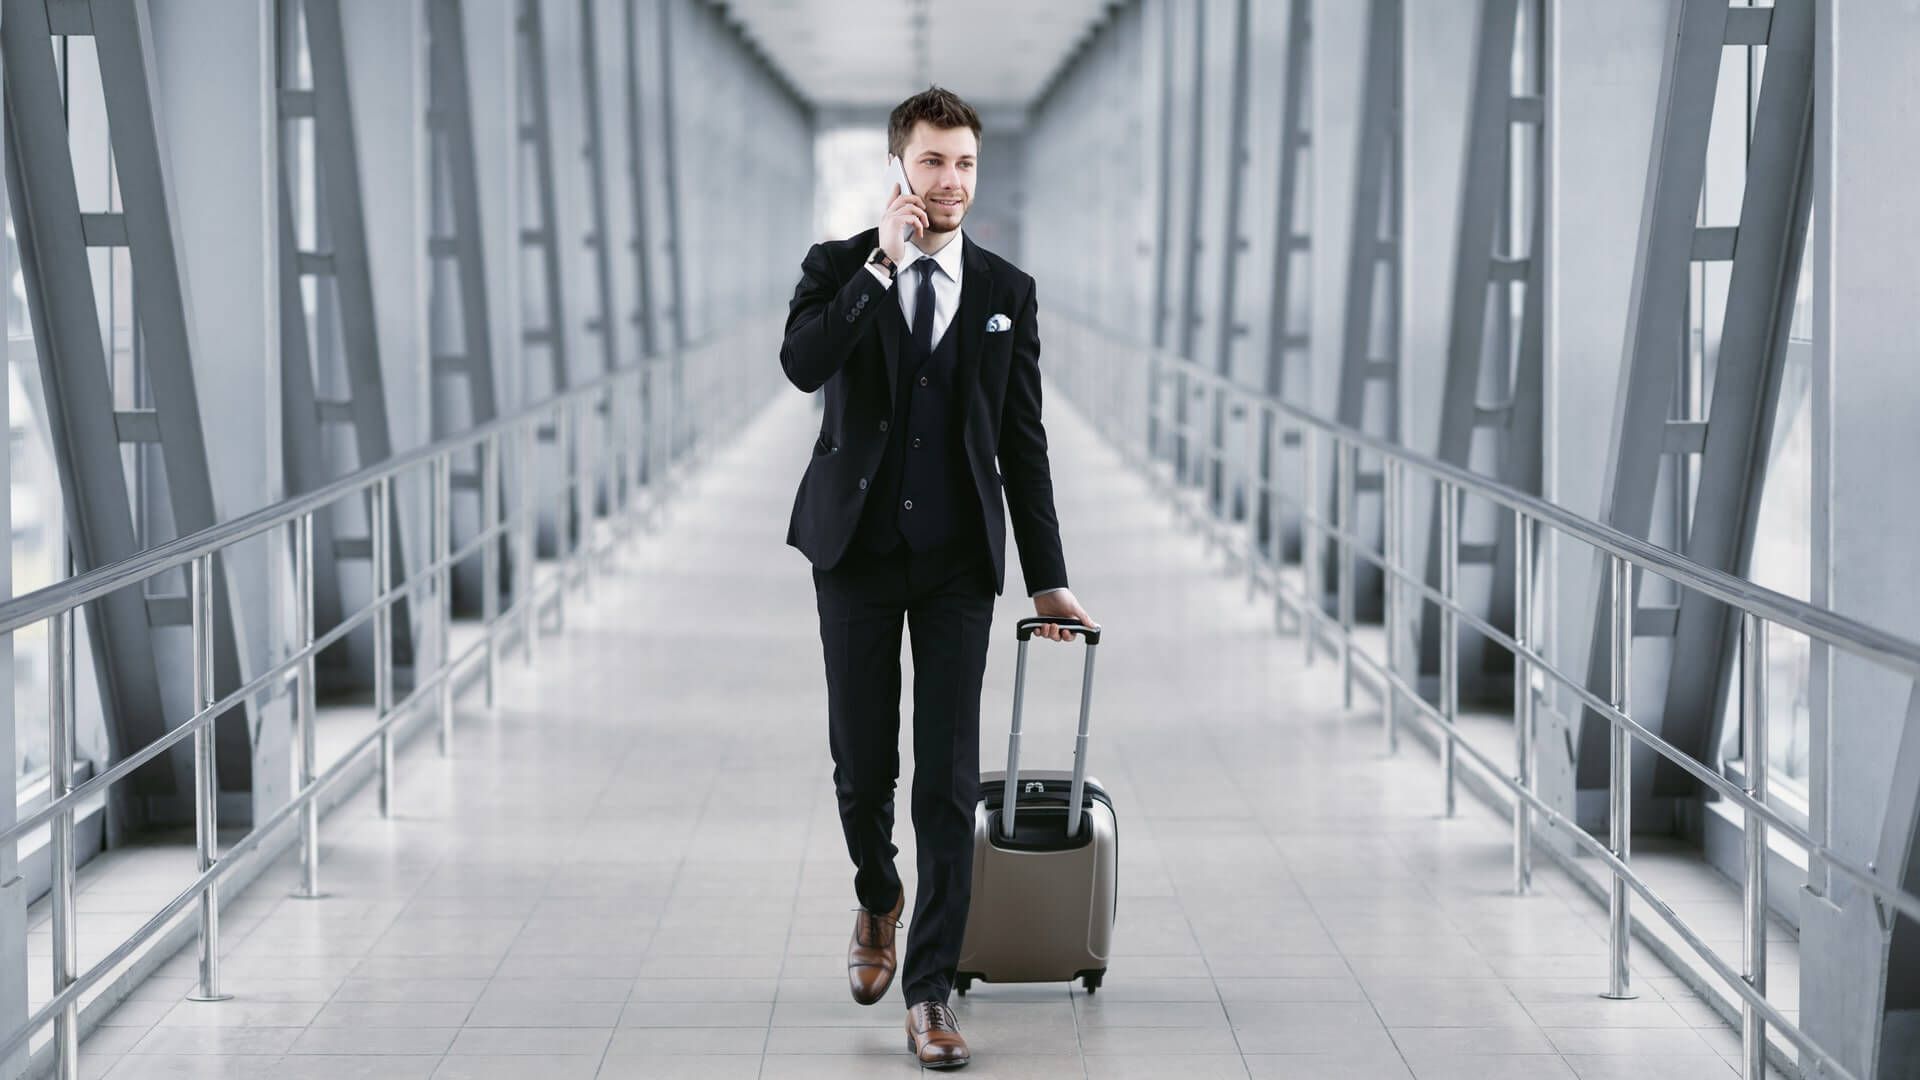 Urban business man in suit talking on smart phone traveling walking with luggage inside the airport, empty space